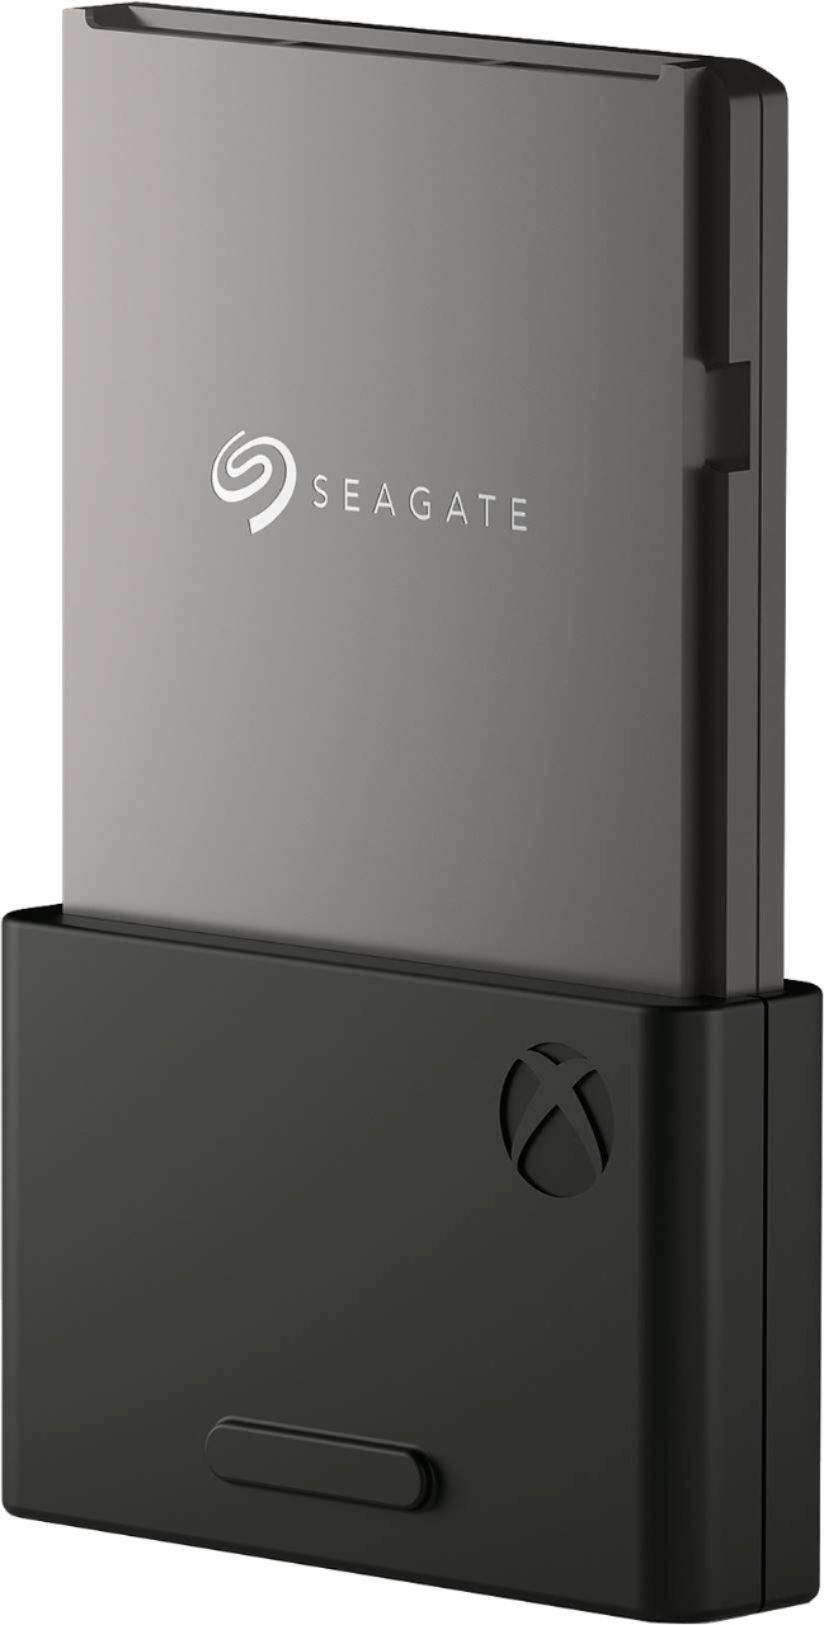 Seagate 1TB Storage Expansion Card for Xbox Series X|S Internal NVMe SSD  Black STJR1000400 - Best Buy